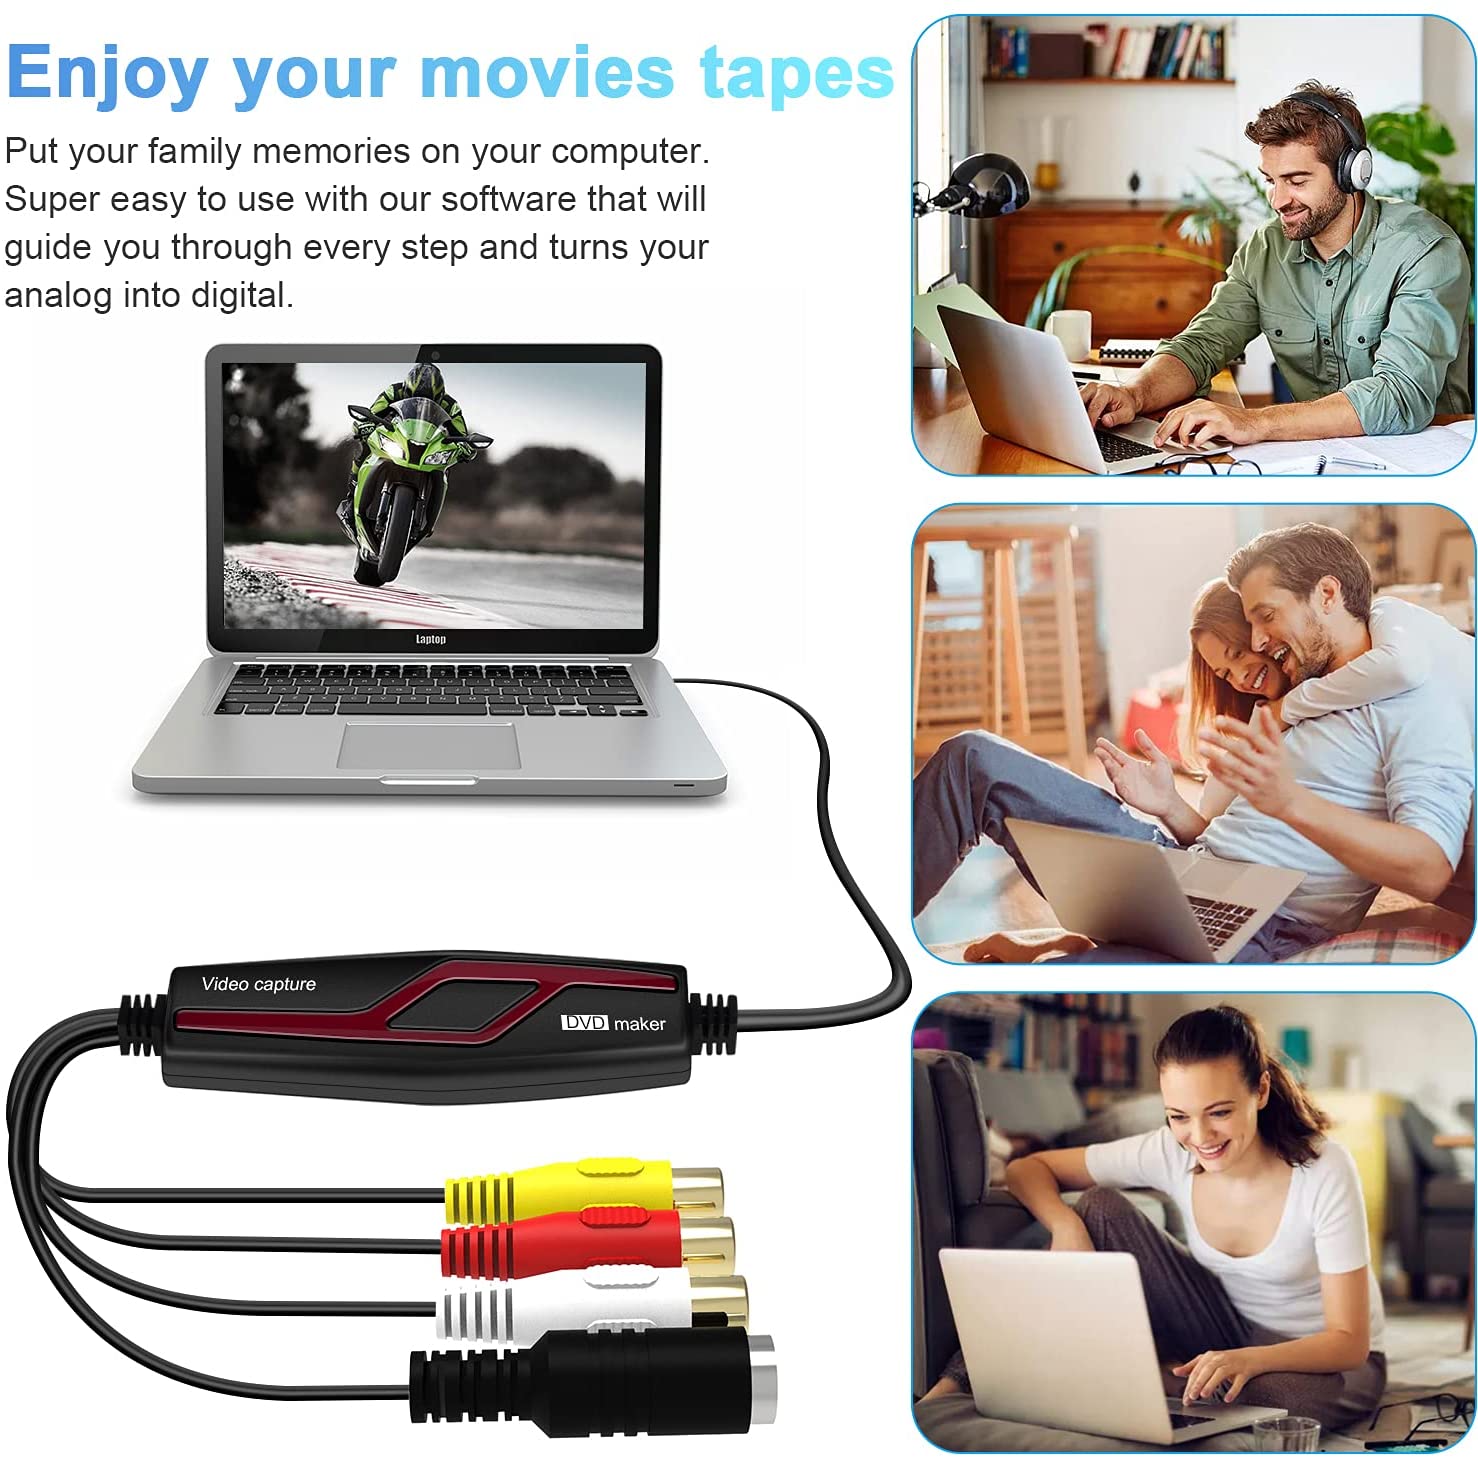 DIGITNOW Video Capture, Capture analog video for your Mac or PC, iPad and iPhone, black